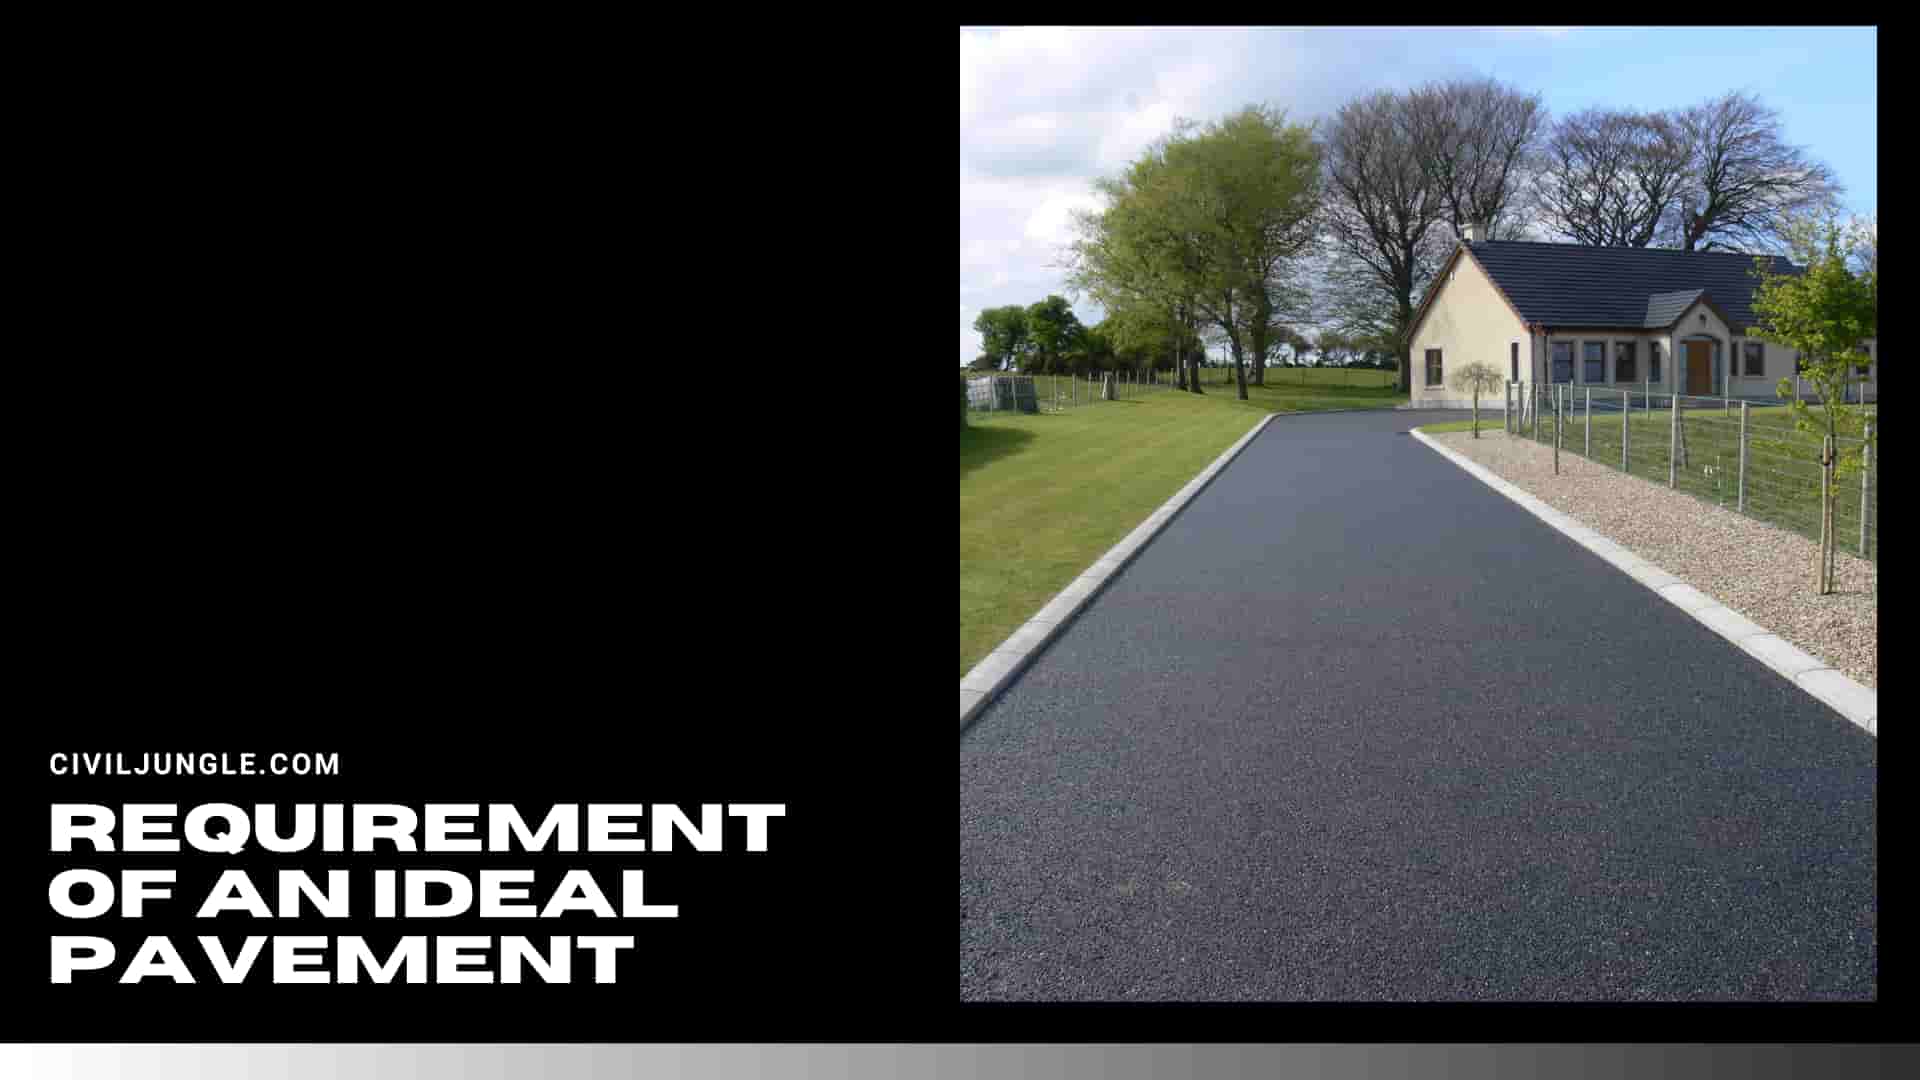 Requirement of an Ideal Pavement